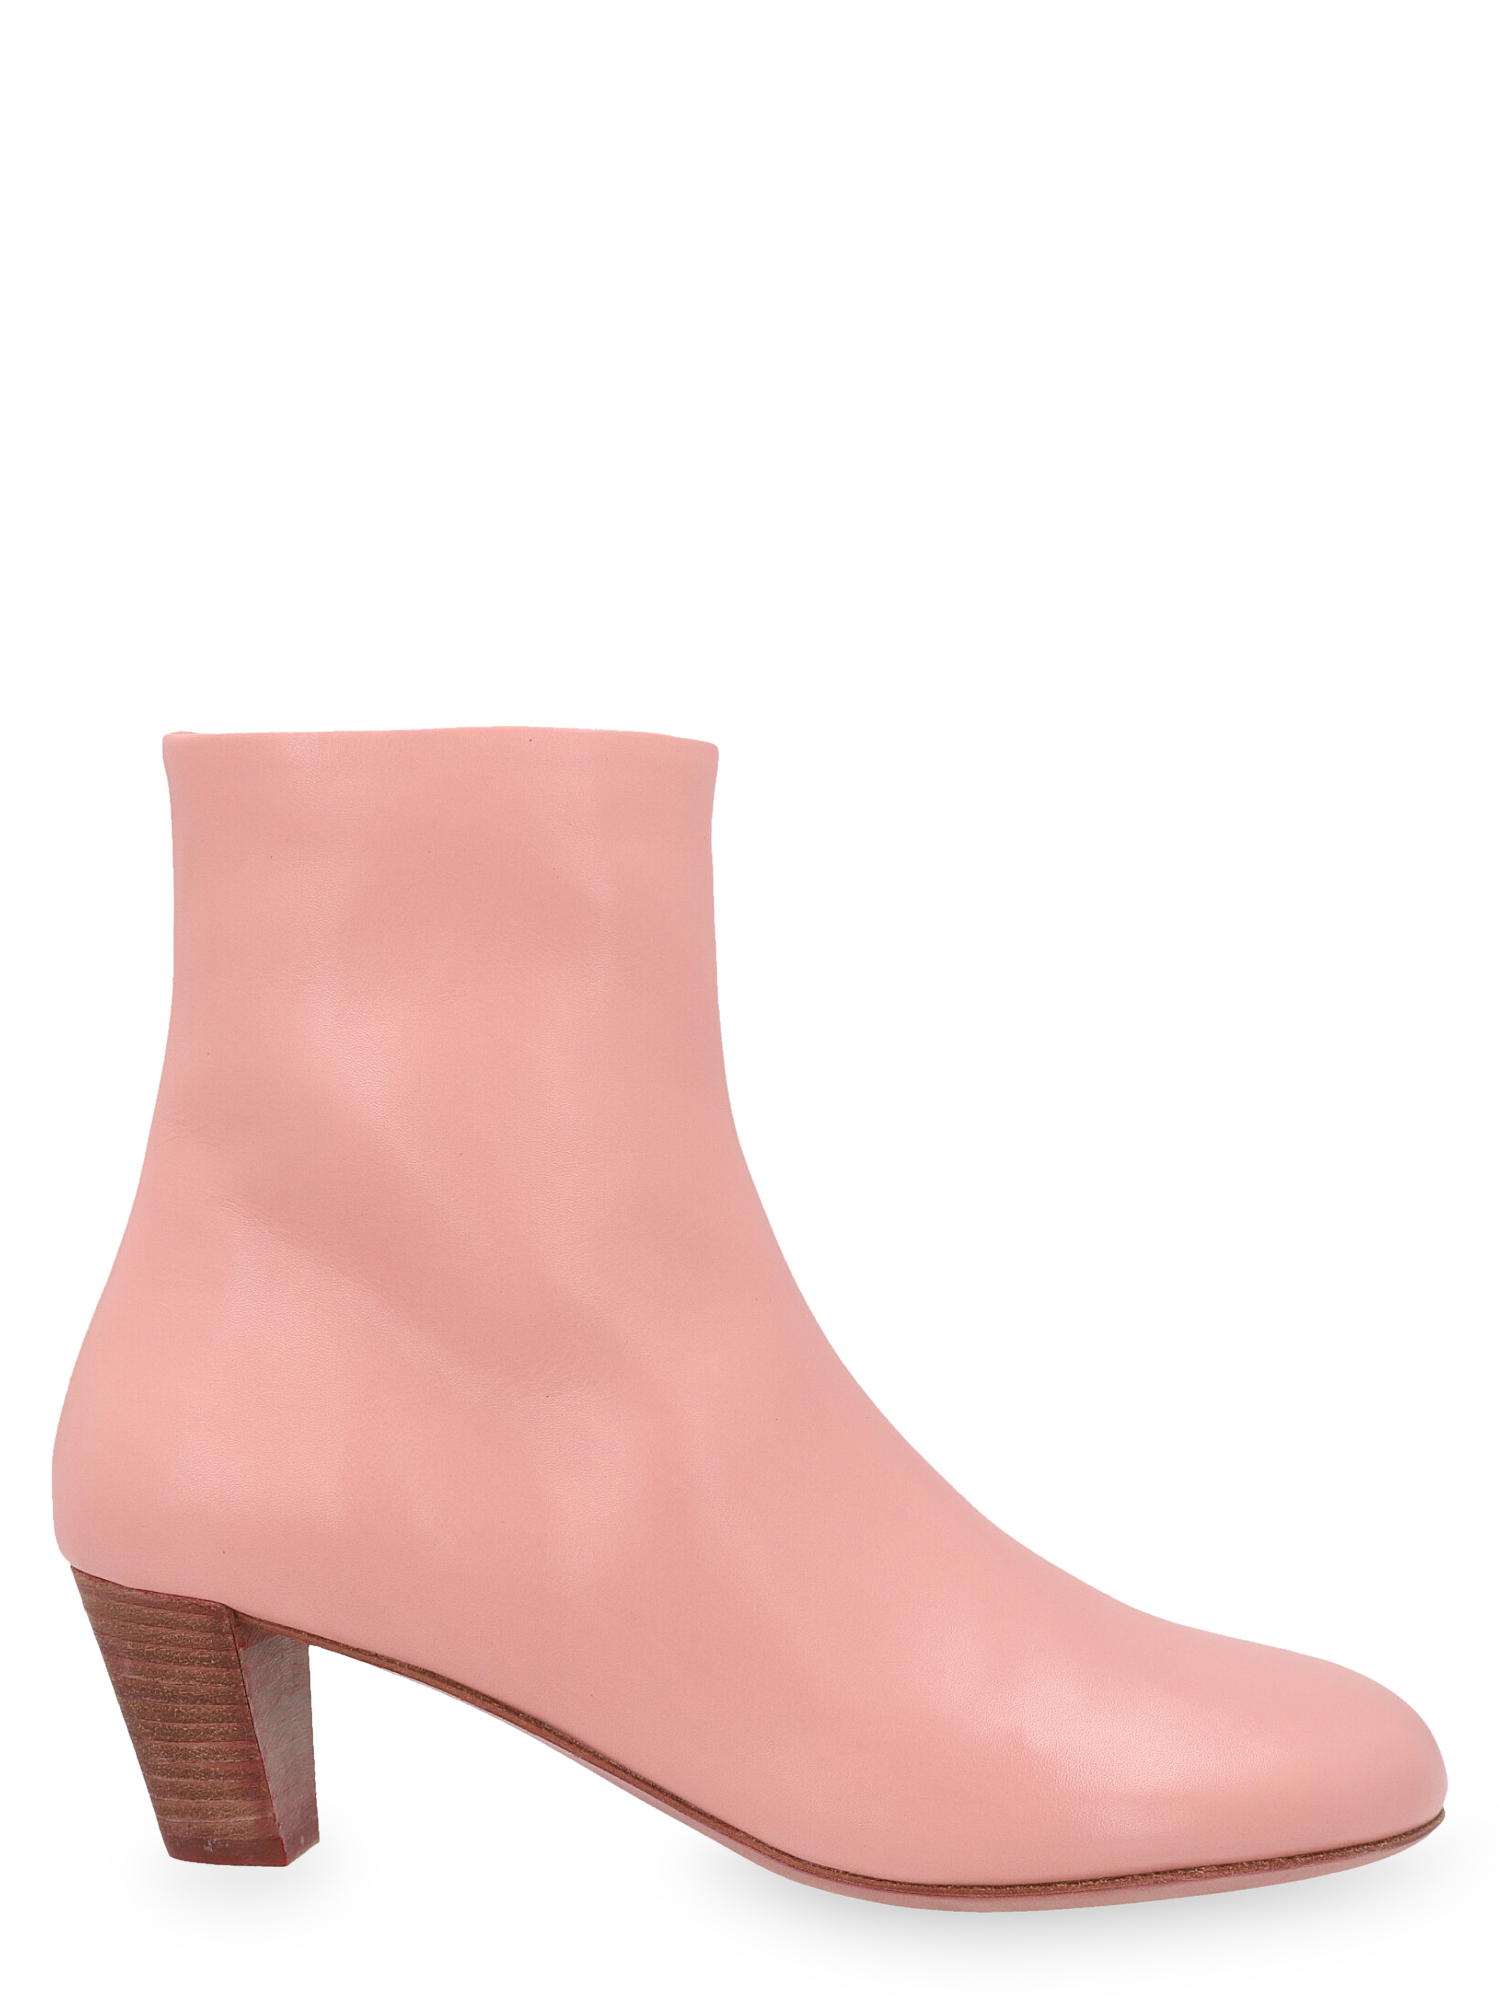 Bottines Pour Femme - Marsell - En Leather Pink - Taille: IT 36 - EU 36